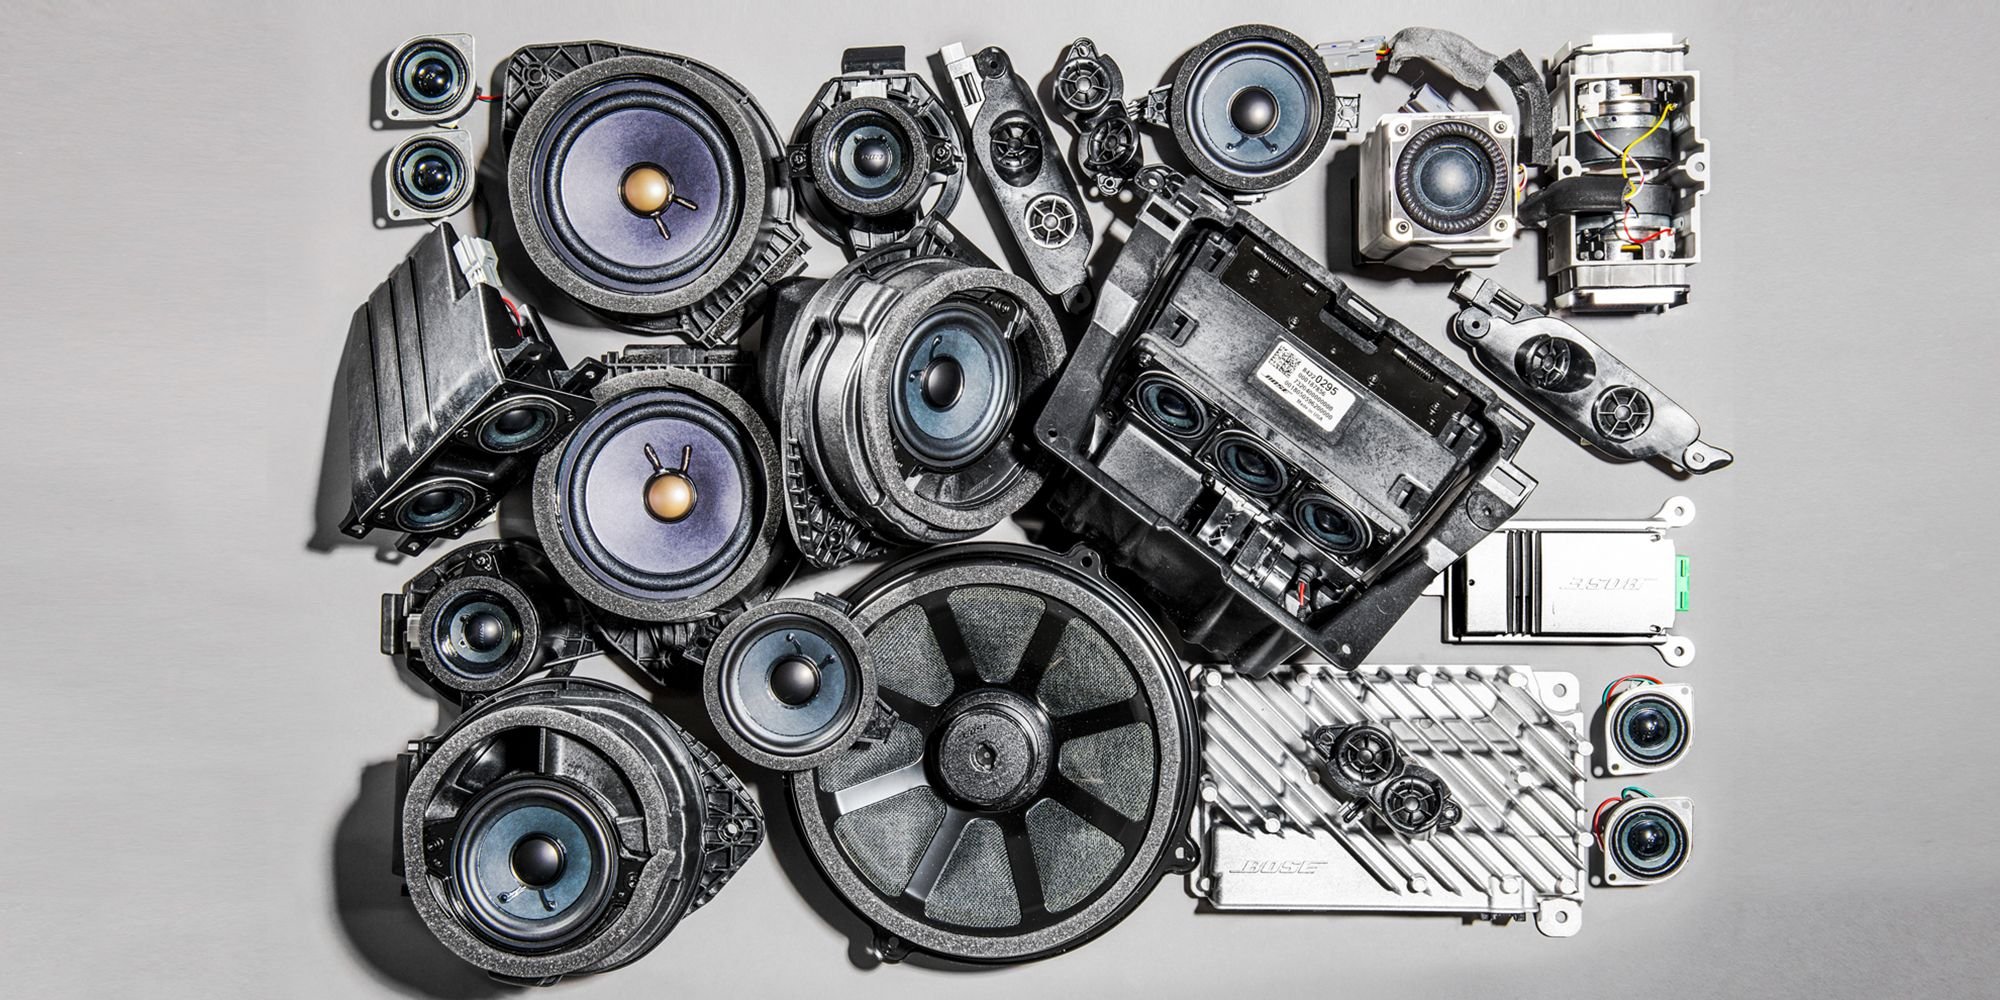 Creating the Perfect In-Car Audio System Is a Complicated Engineering Battle